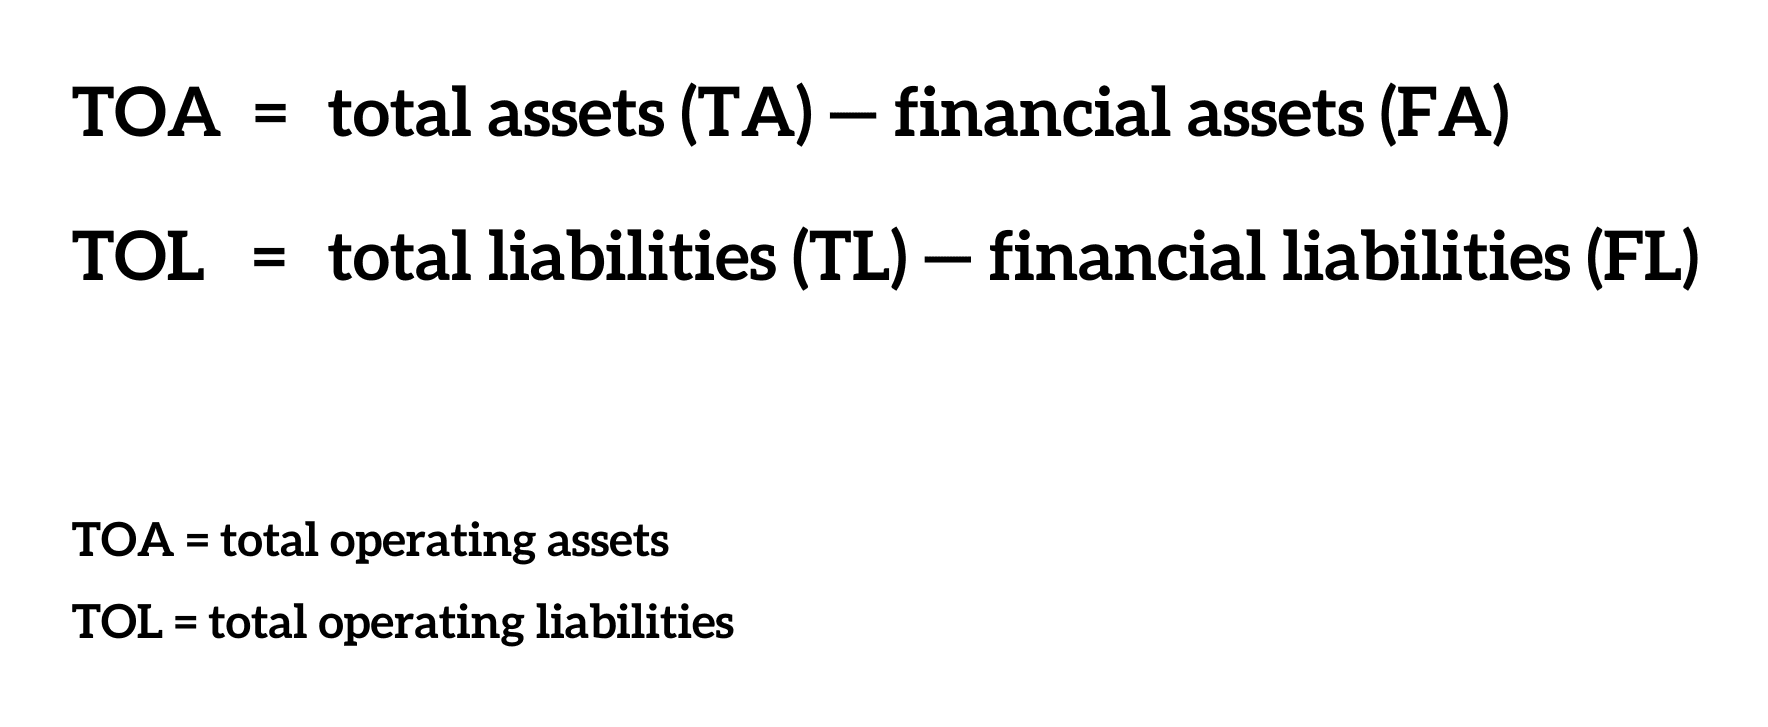 Calculations for total operational assets and total operational liabilities